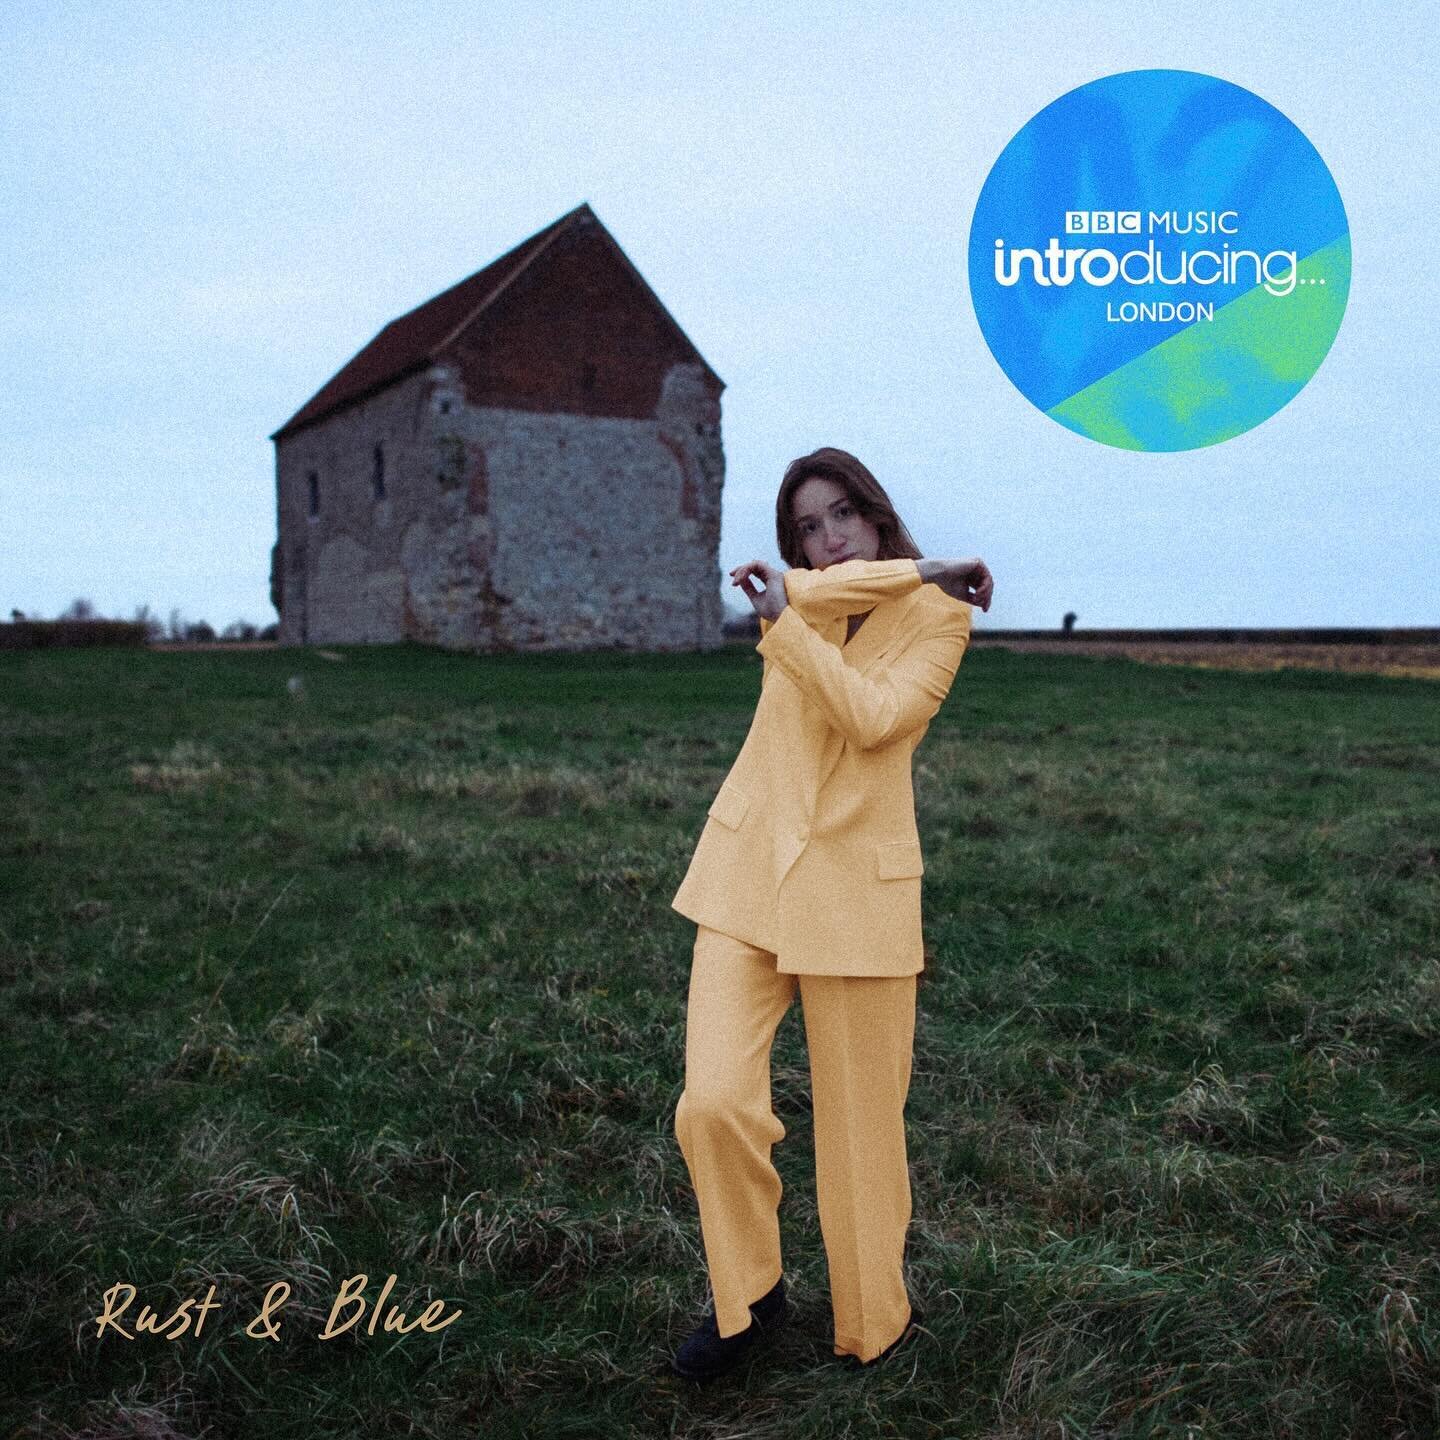 Enormous thanks to queen @jjiszatt for giving Rust &amp; Blue its first spin on @bbcintroducing before it's out on Tuesday! 

Isn't there something very nostalgic about hearing a song on the radio before it's out?

Have a beautiful weekend my friends